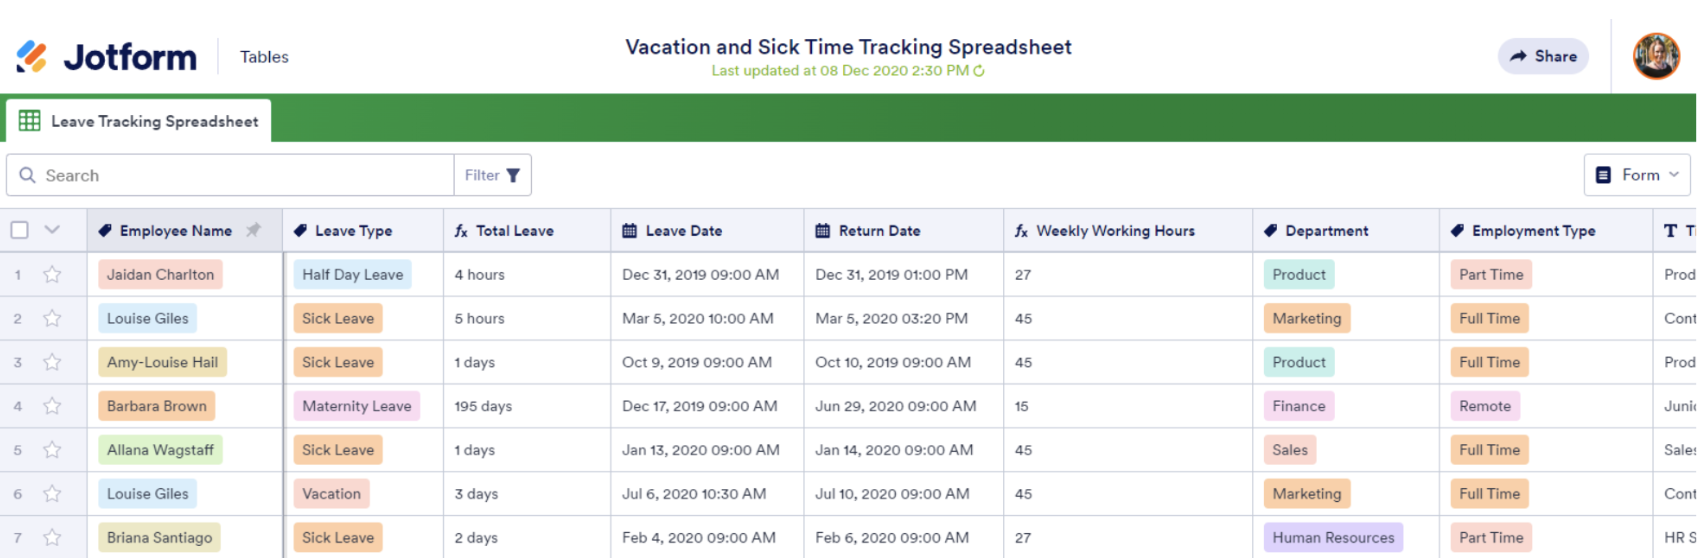 Image of Vacation and Sick Time Tracking Spreadsheet